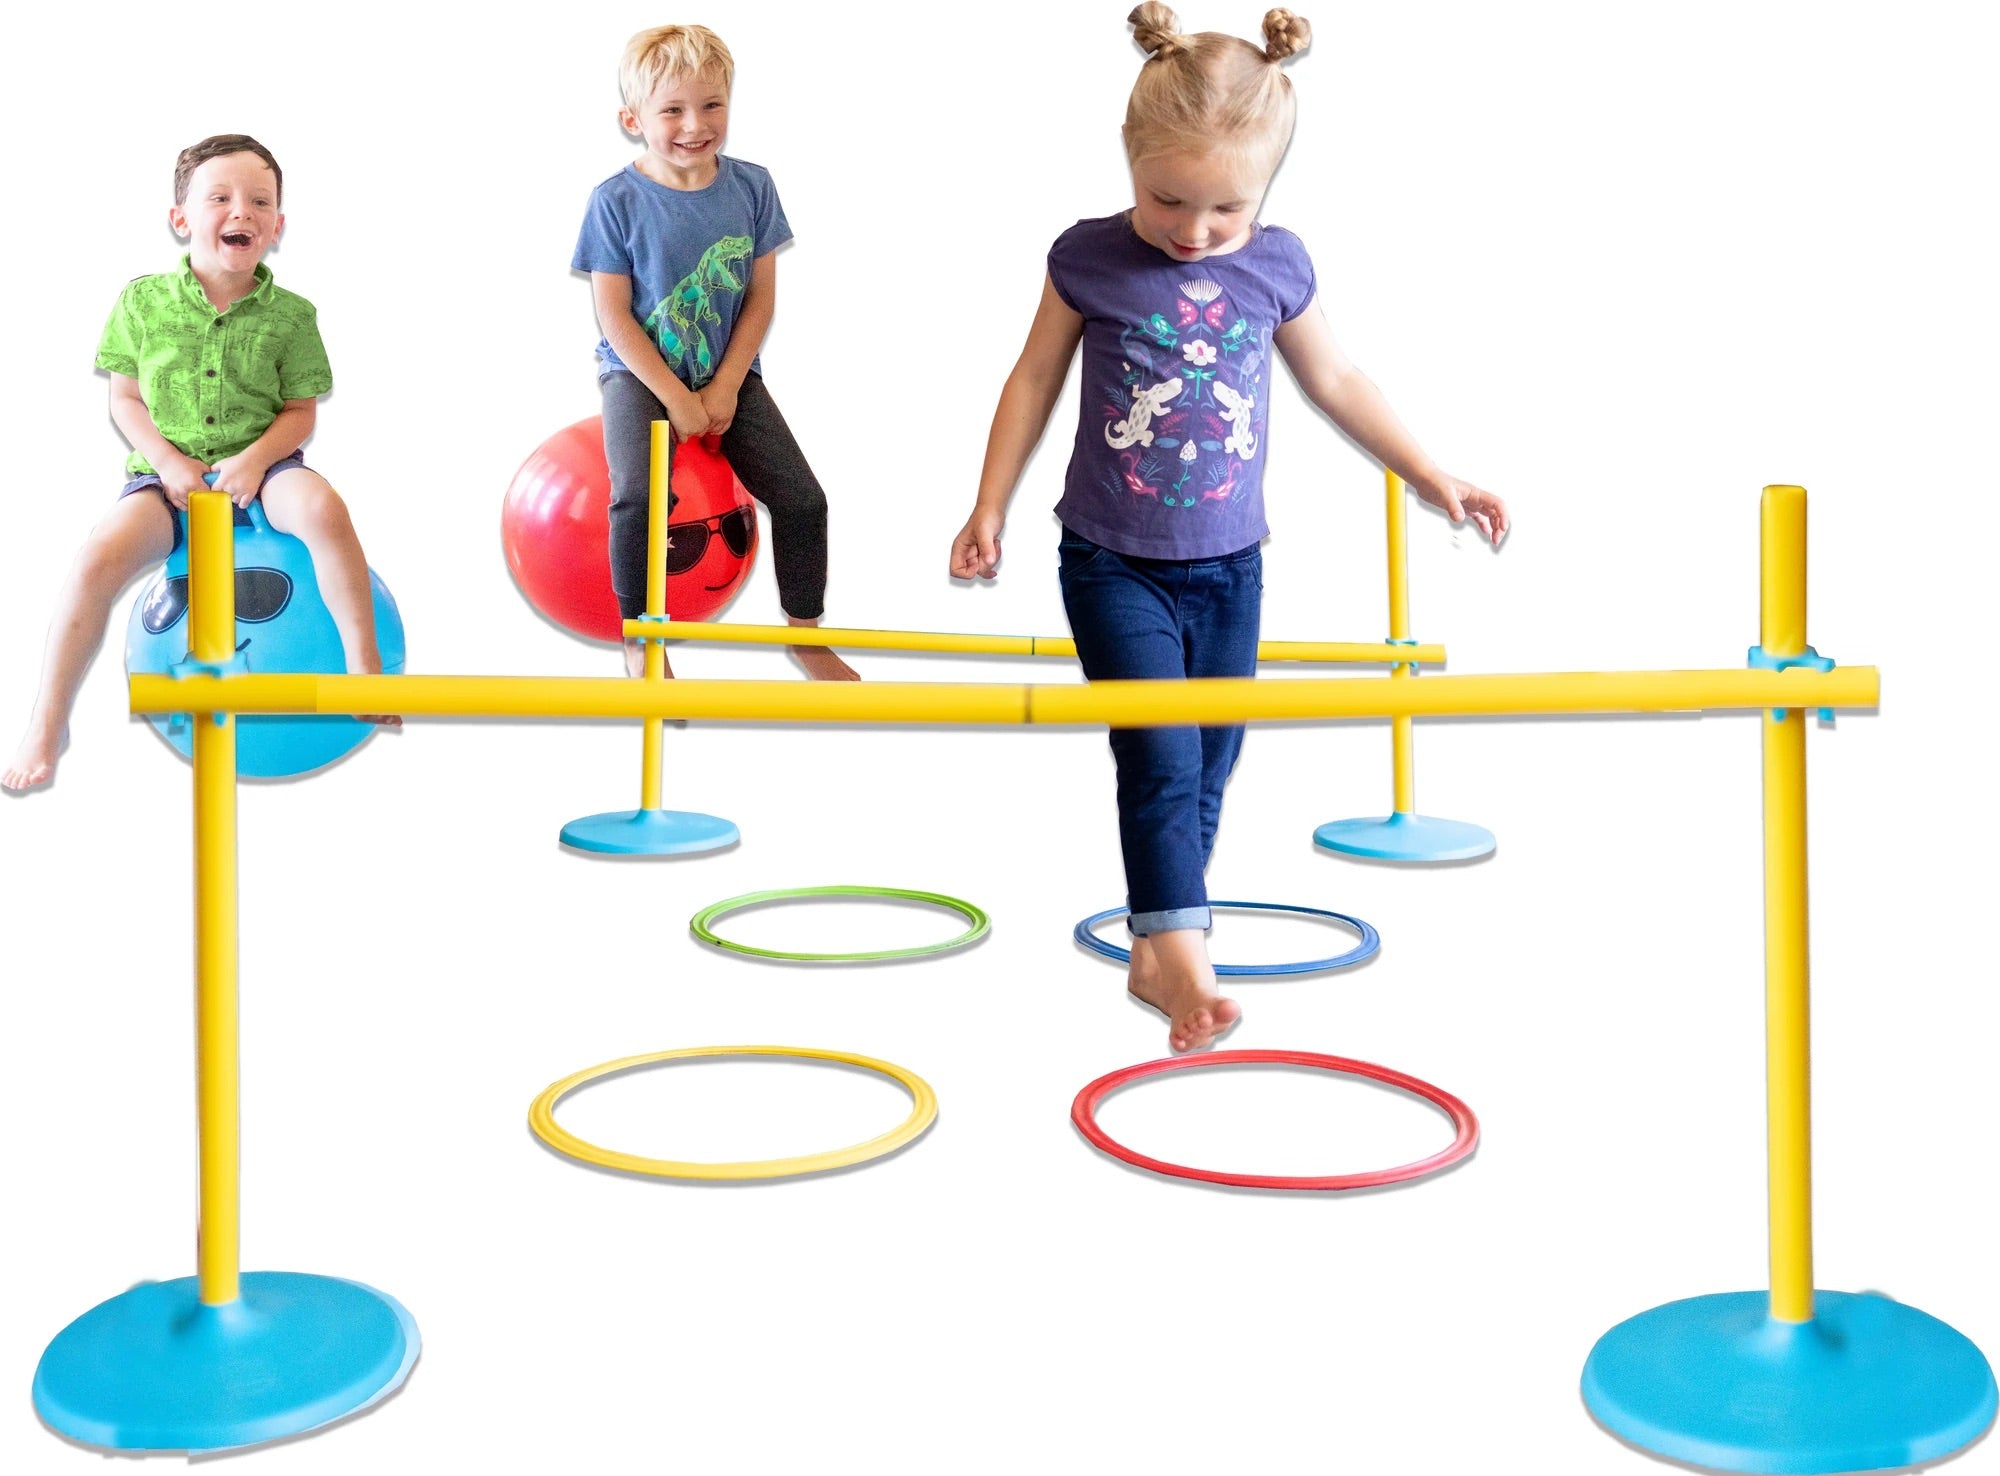 Obstacle Race Set by Playzone-fit #PLZ-639